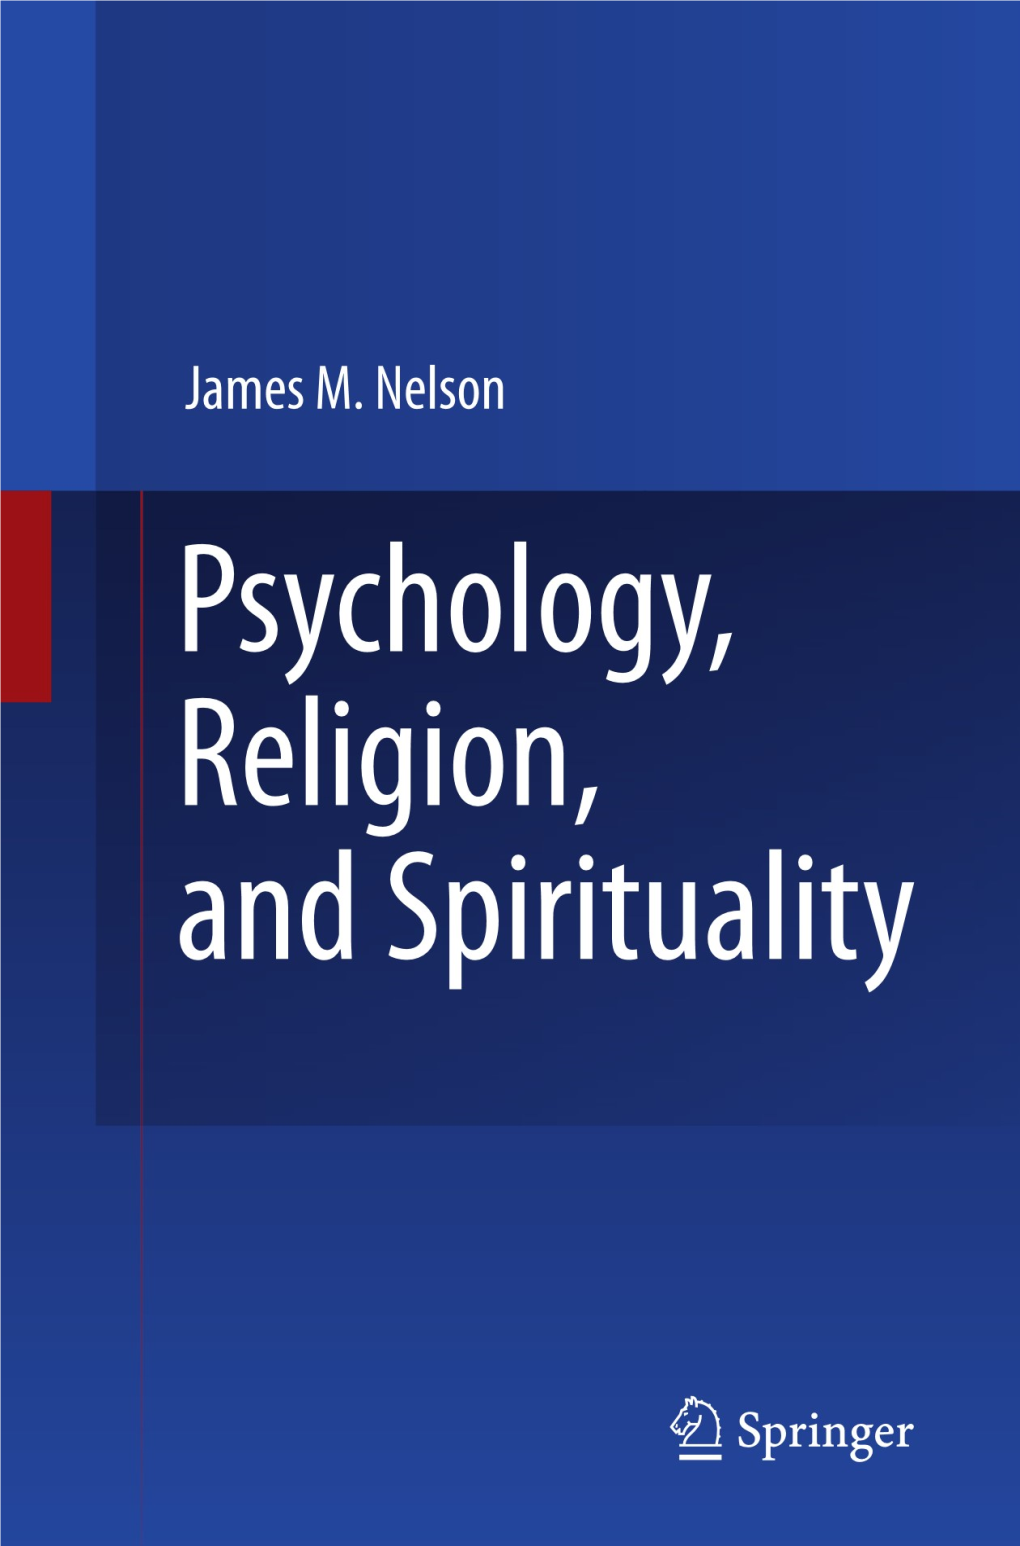 Religious Traditions They Wish to Study, and Theologians May Not Be up to Date on the Latest Developments in Psychology